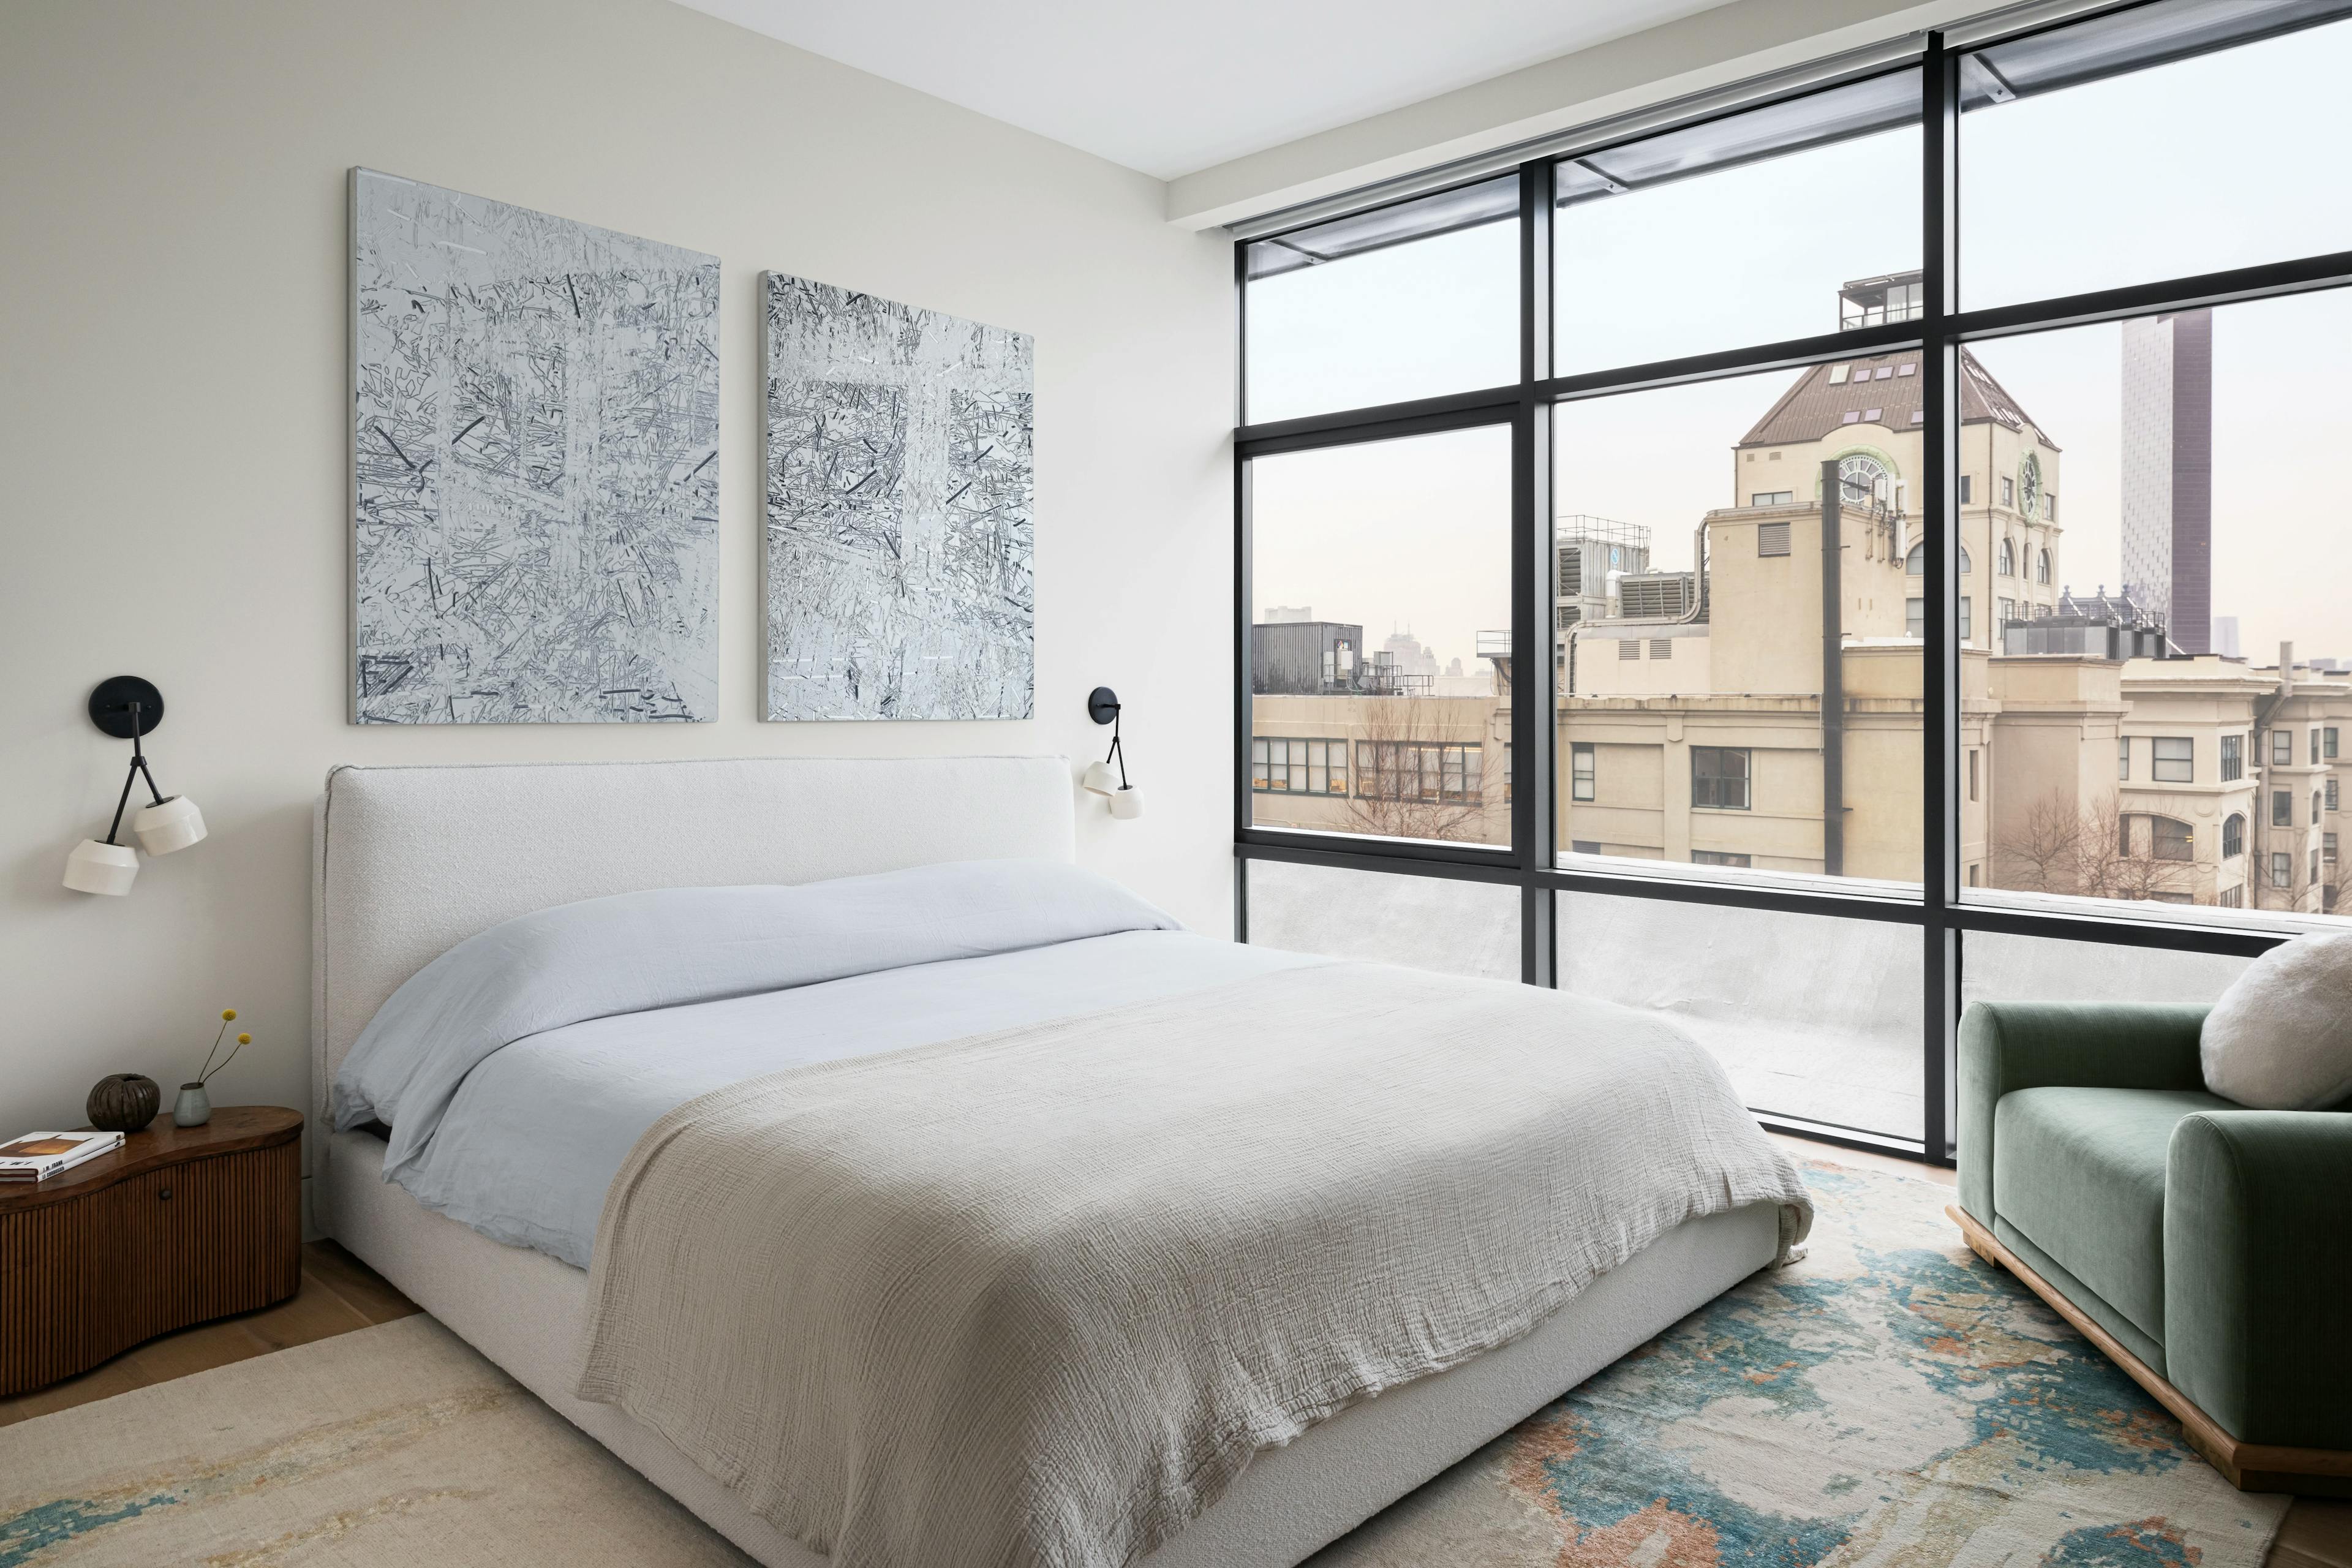 Textured, gray diptych by artist Blake Aaseby installed above a bed in a bedroom with floor-to-ceiling windows.